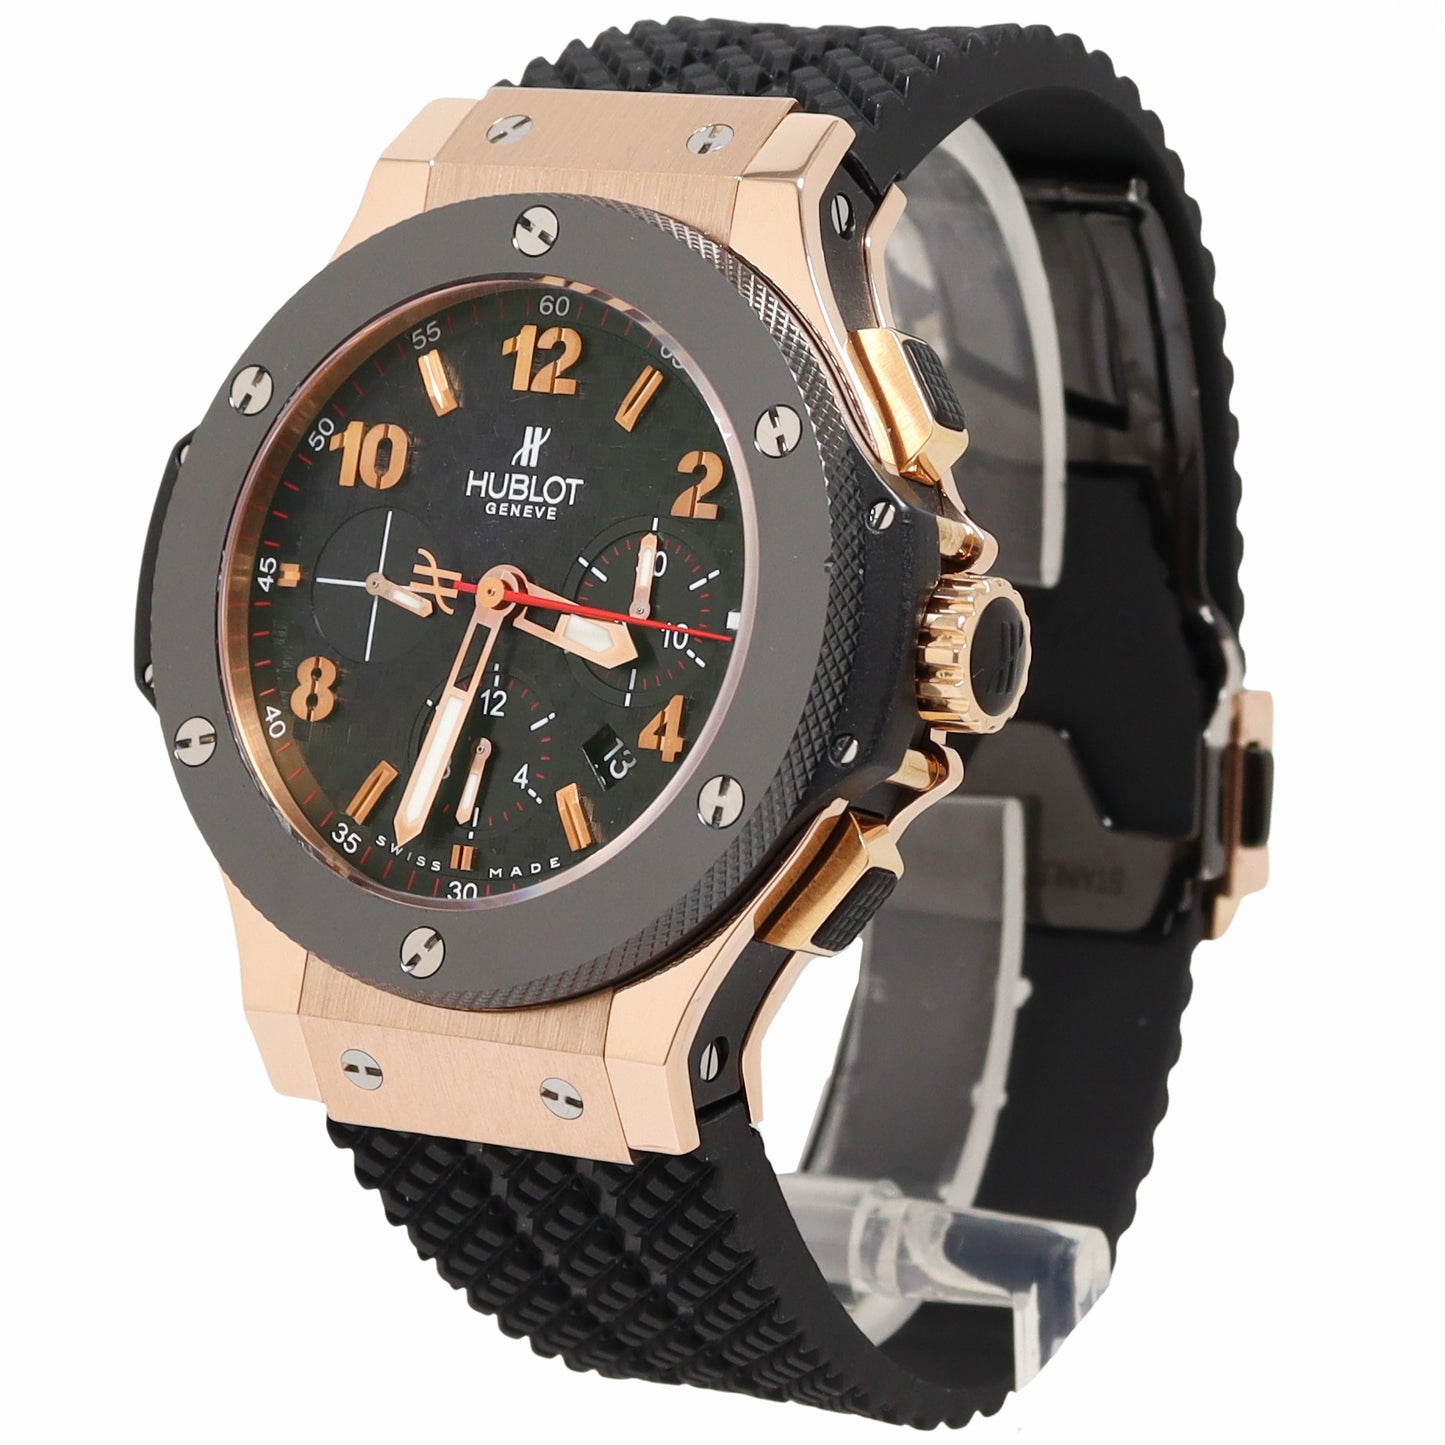 Hublot Big Bang 44mm Rose Gold Black Chronograph Dial Watch Reference# 301.PB.131.RX - Happy Jewelers Fine Jewelry Lifetime Warranty